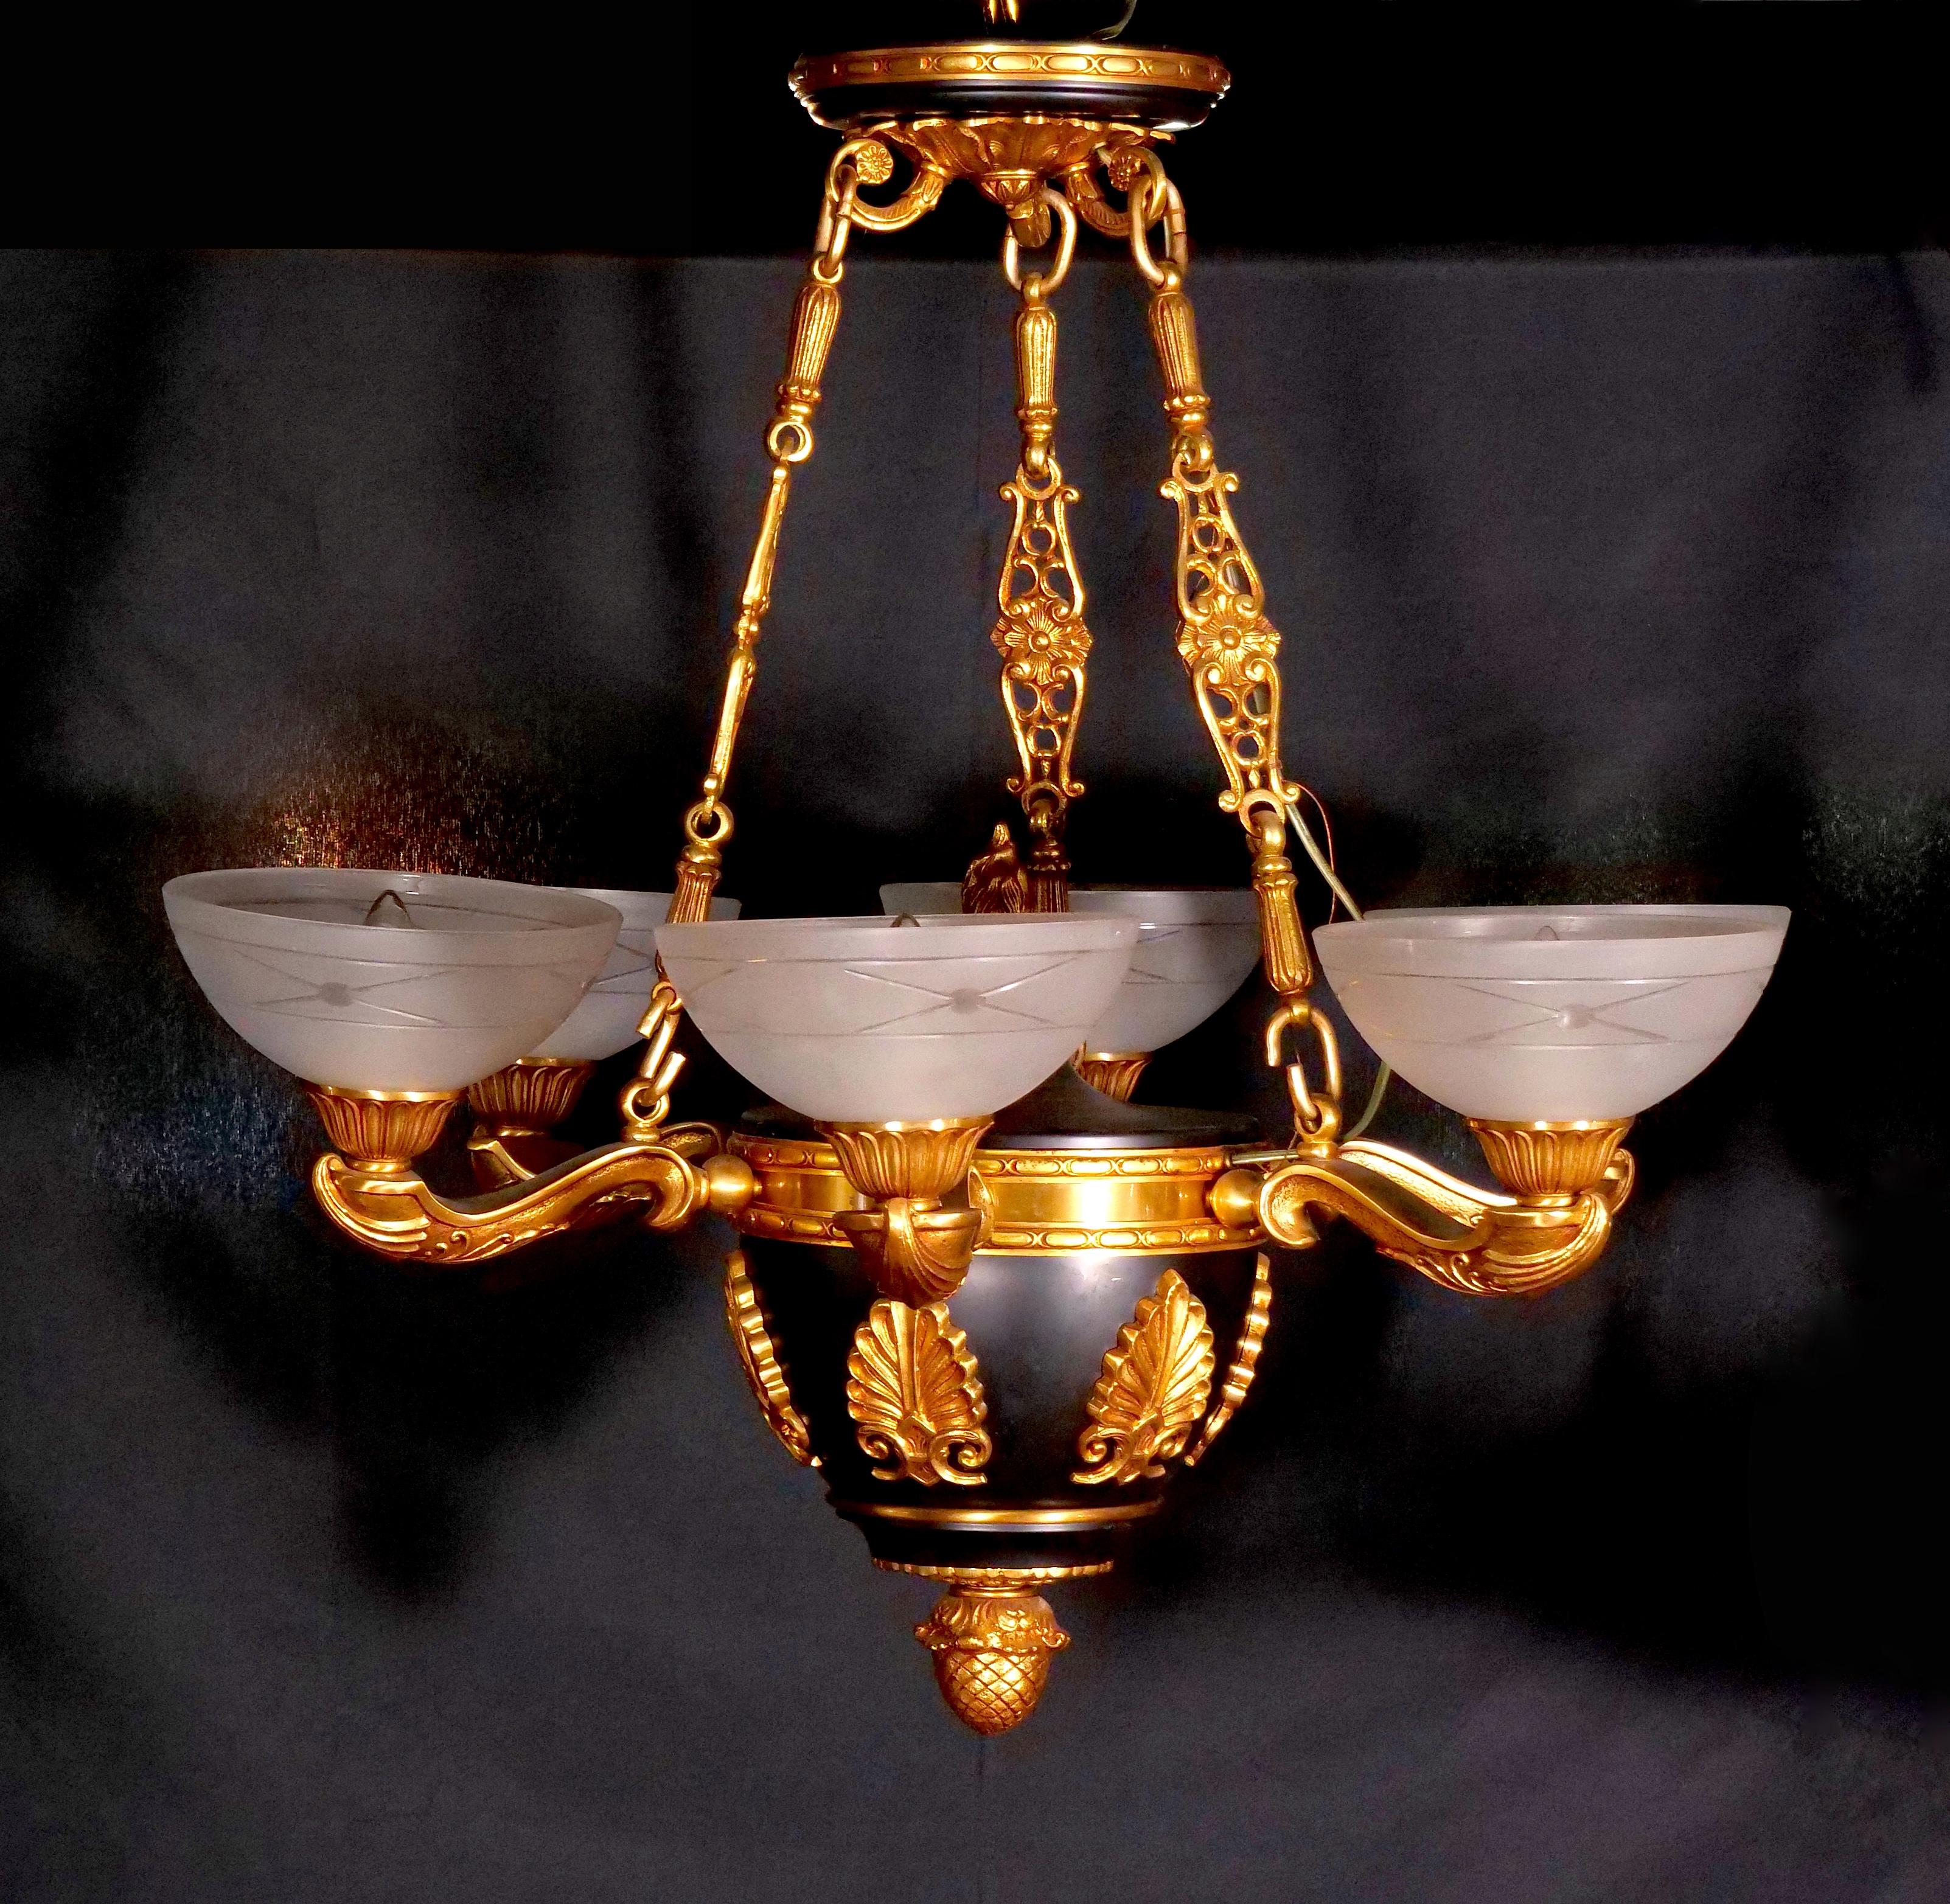 19th Century French Bronze Ormolu Mounted / Patinated Empire Style Chandelier For Sale 6